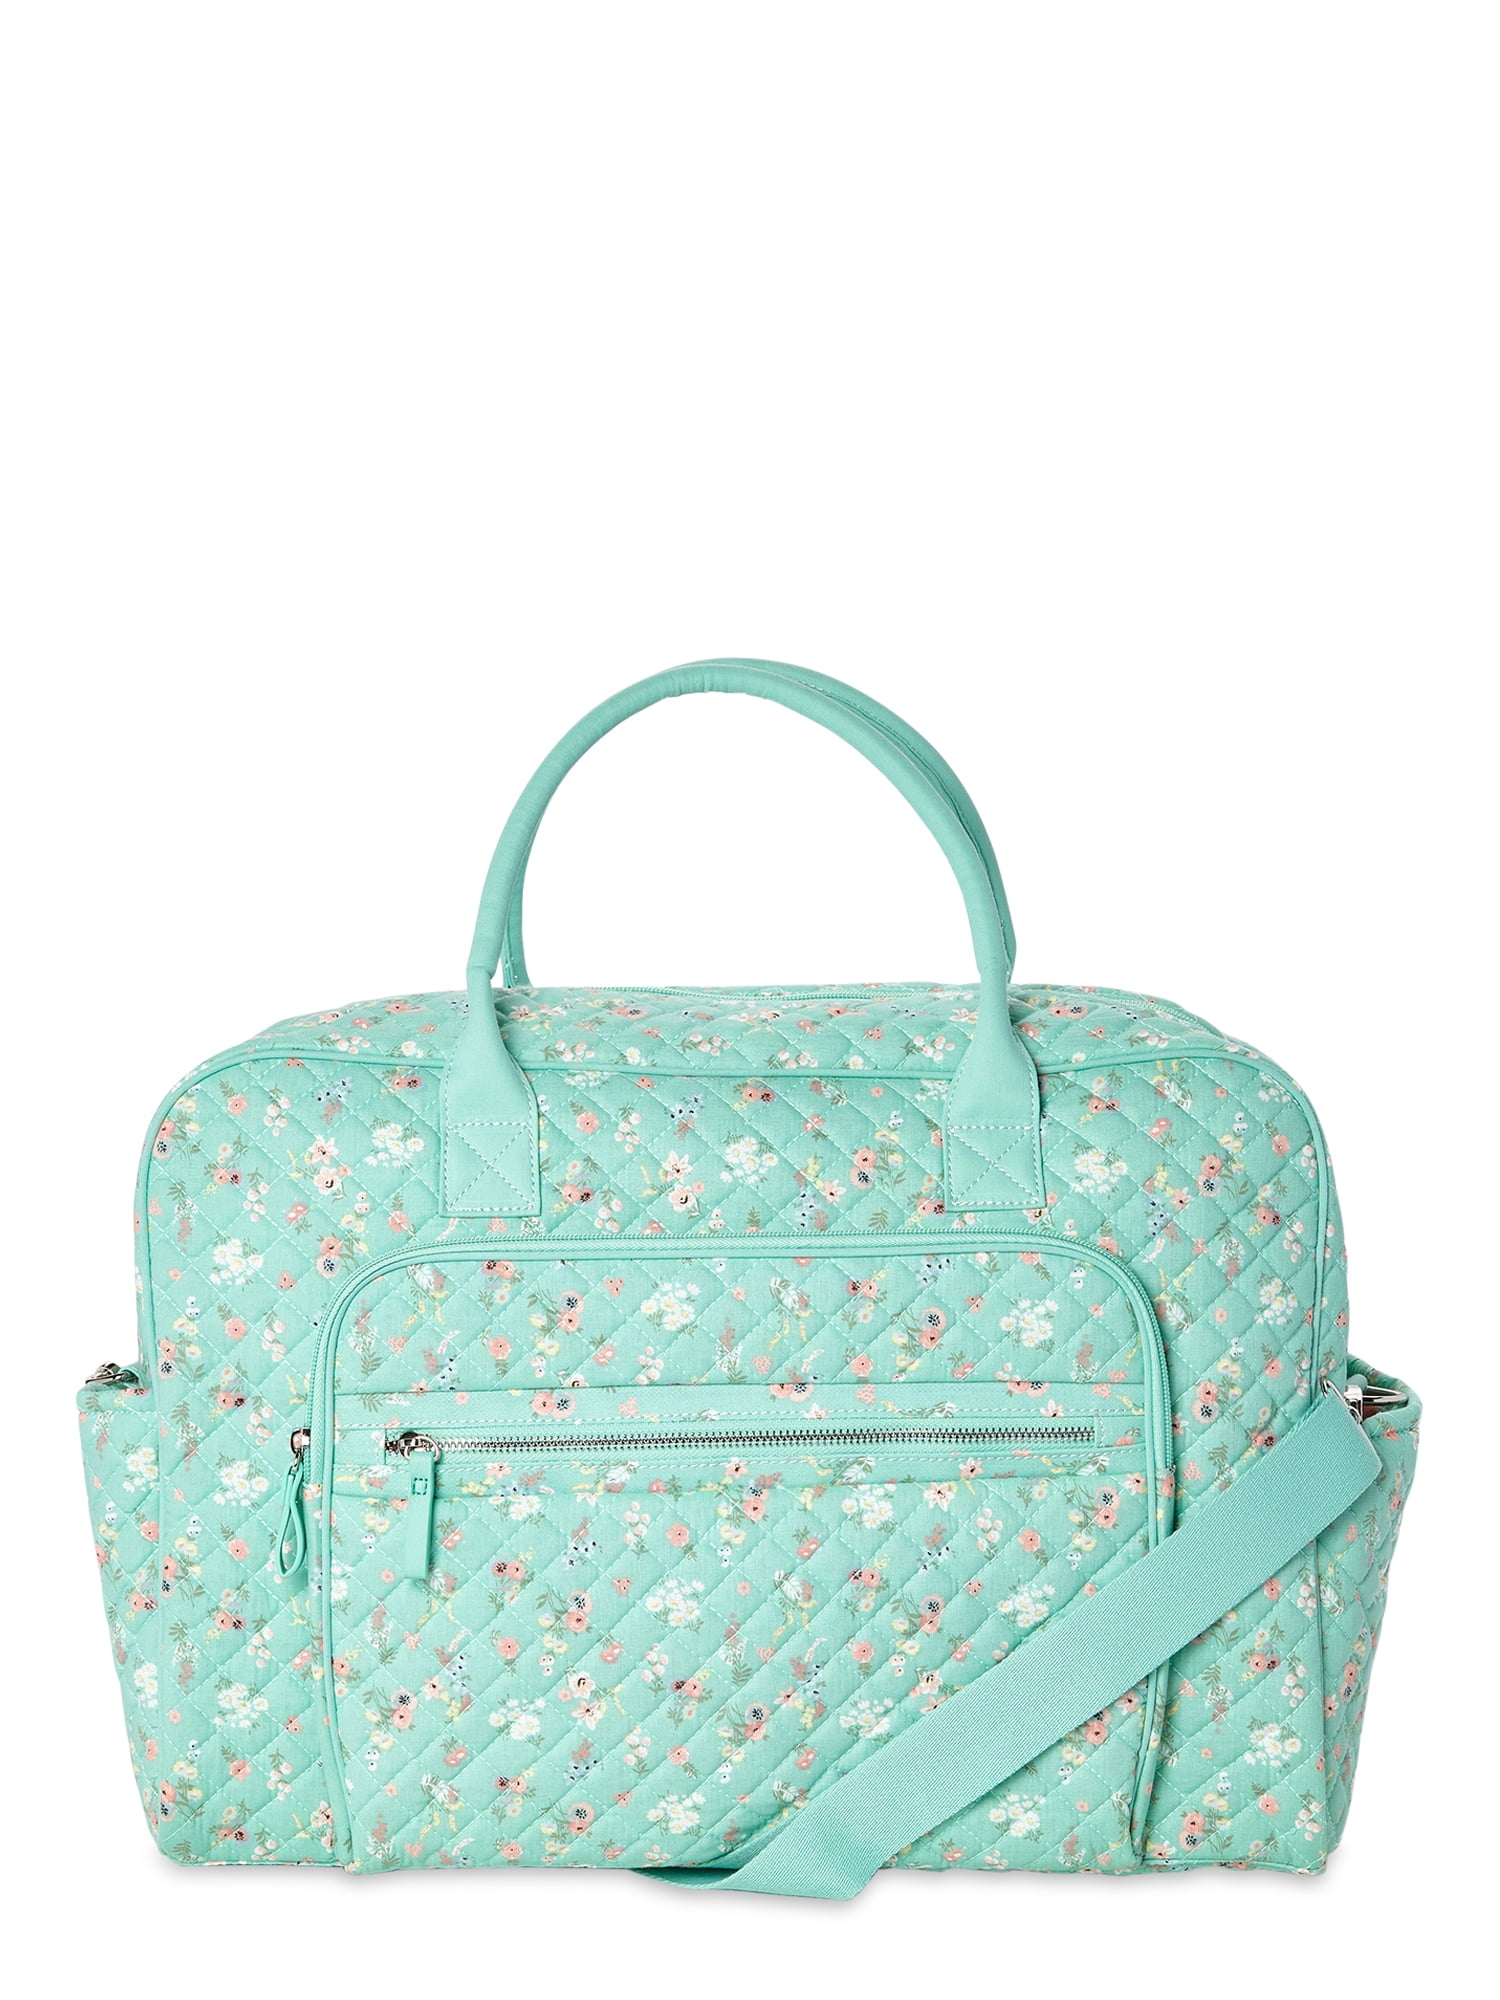 Weekender Pretty Ditsy Floral Pattern in Bright Colors for Summer Weekend Bag for Women Oversized Bags